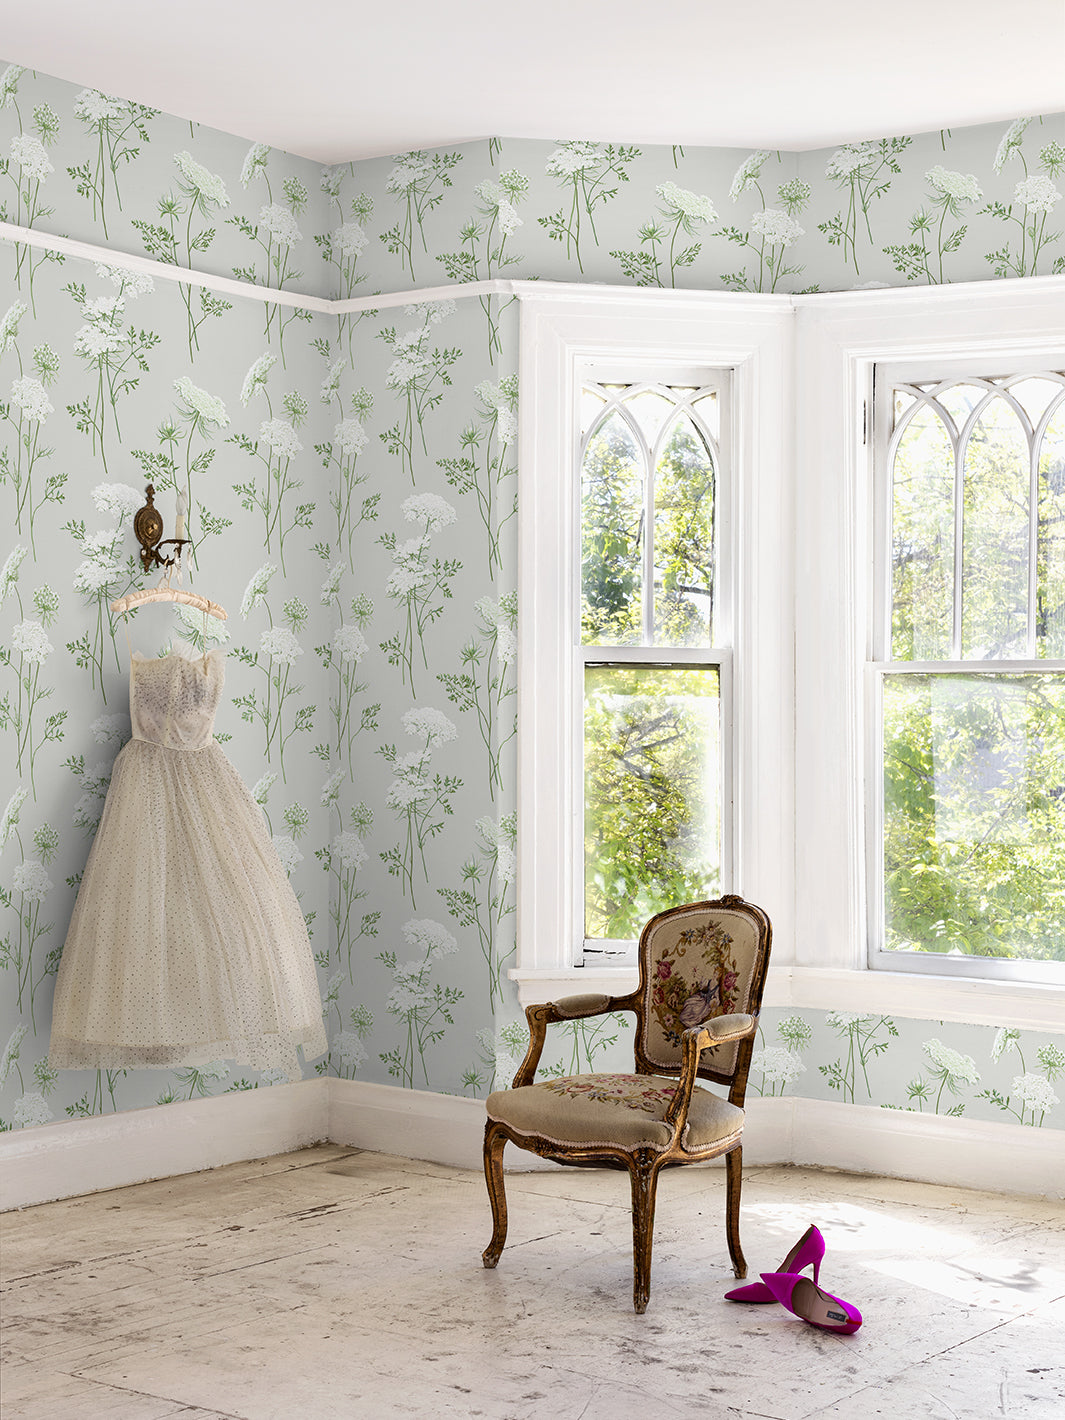 'The Queen's Lace' Wallpaper by Sarah Jessica Parker - Silver